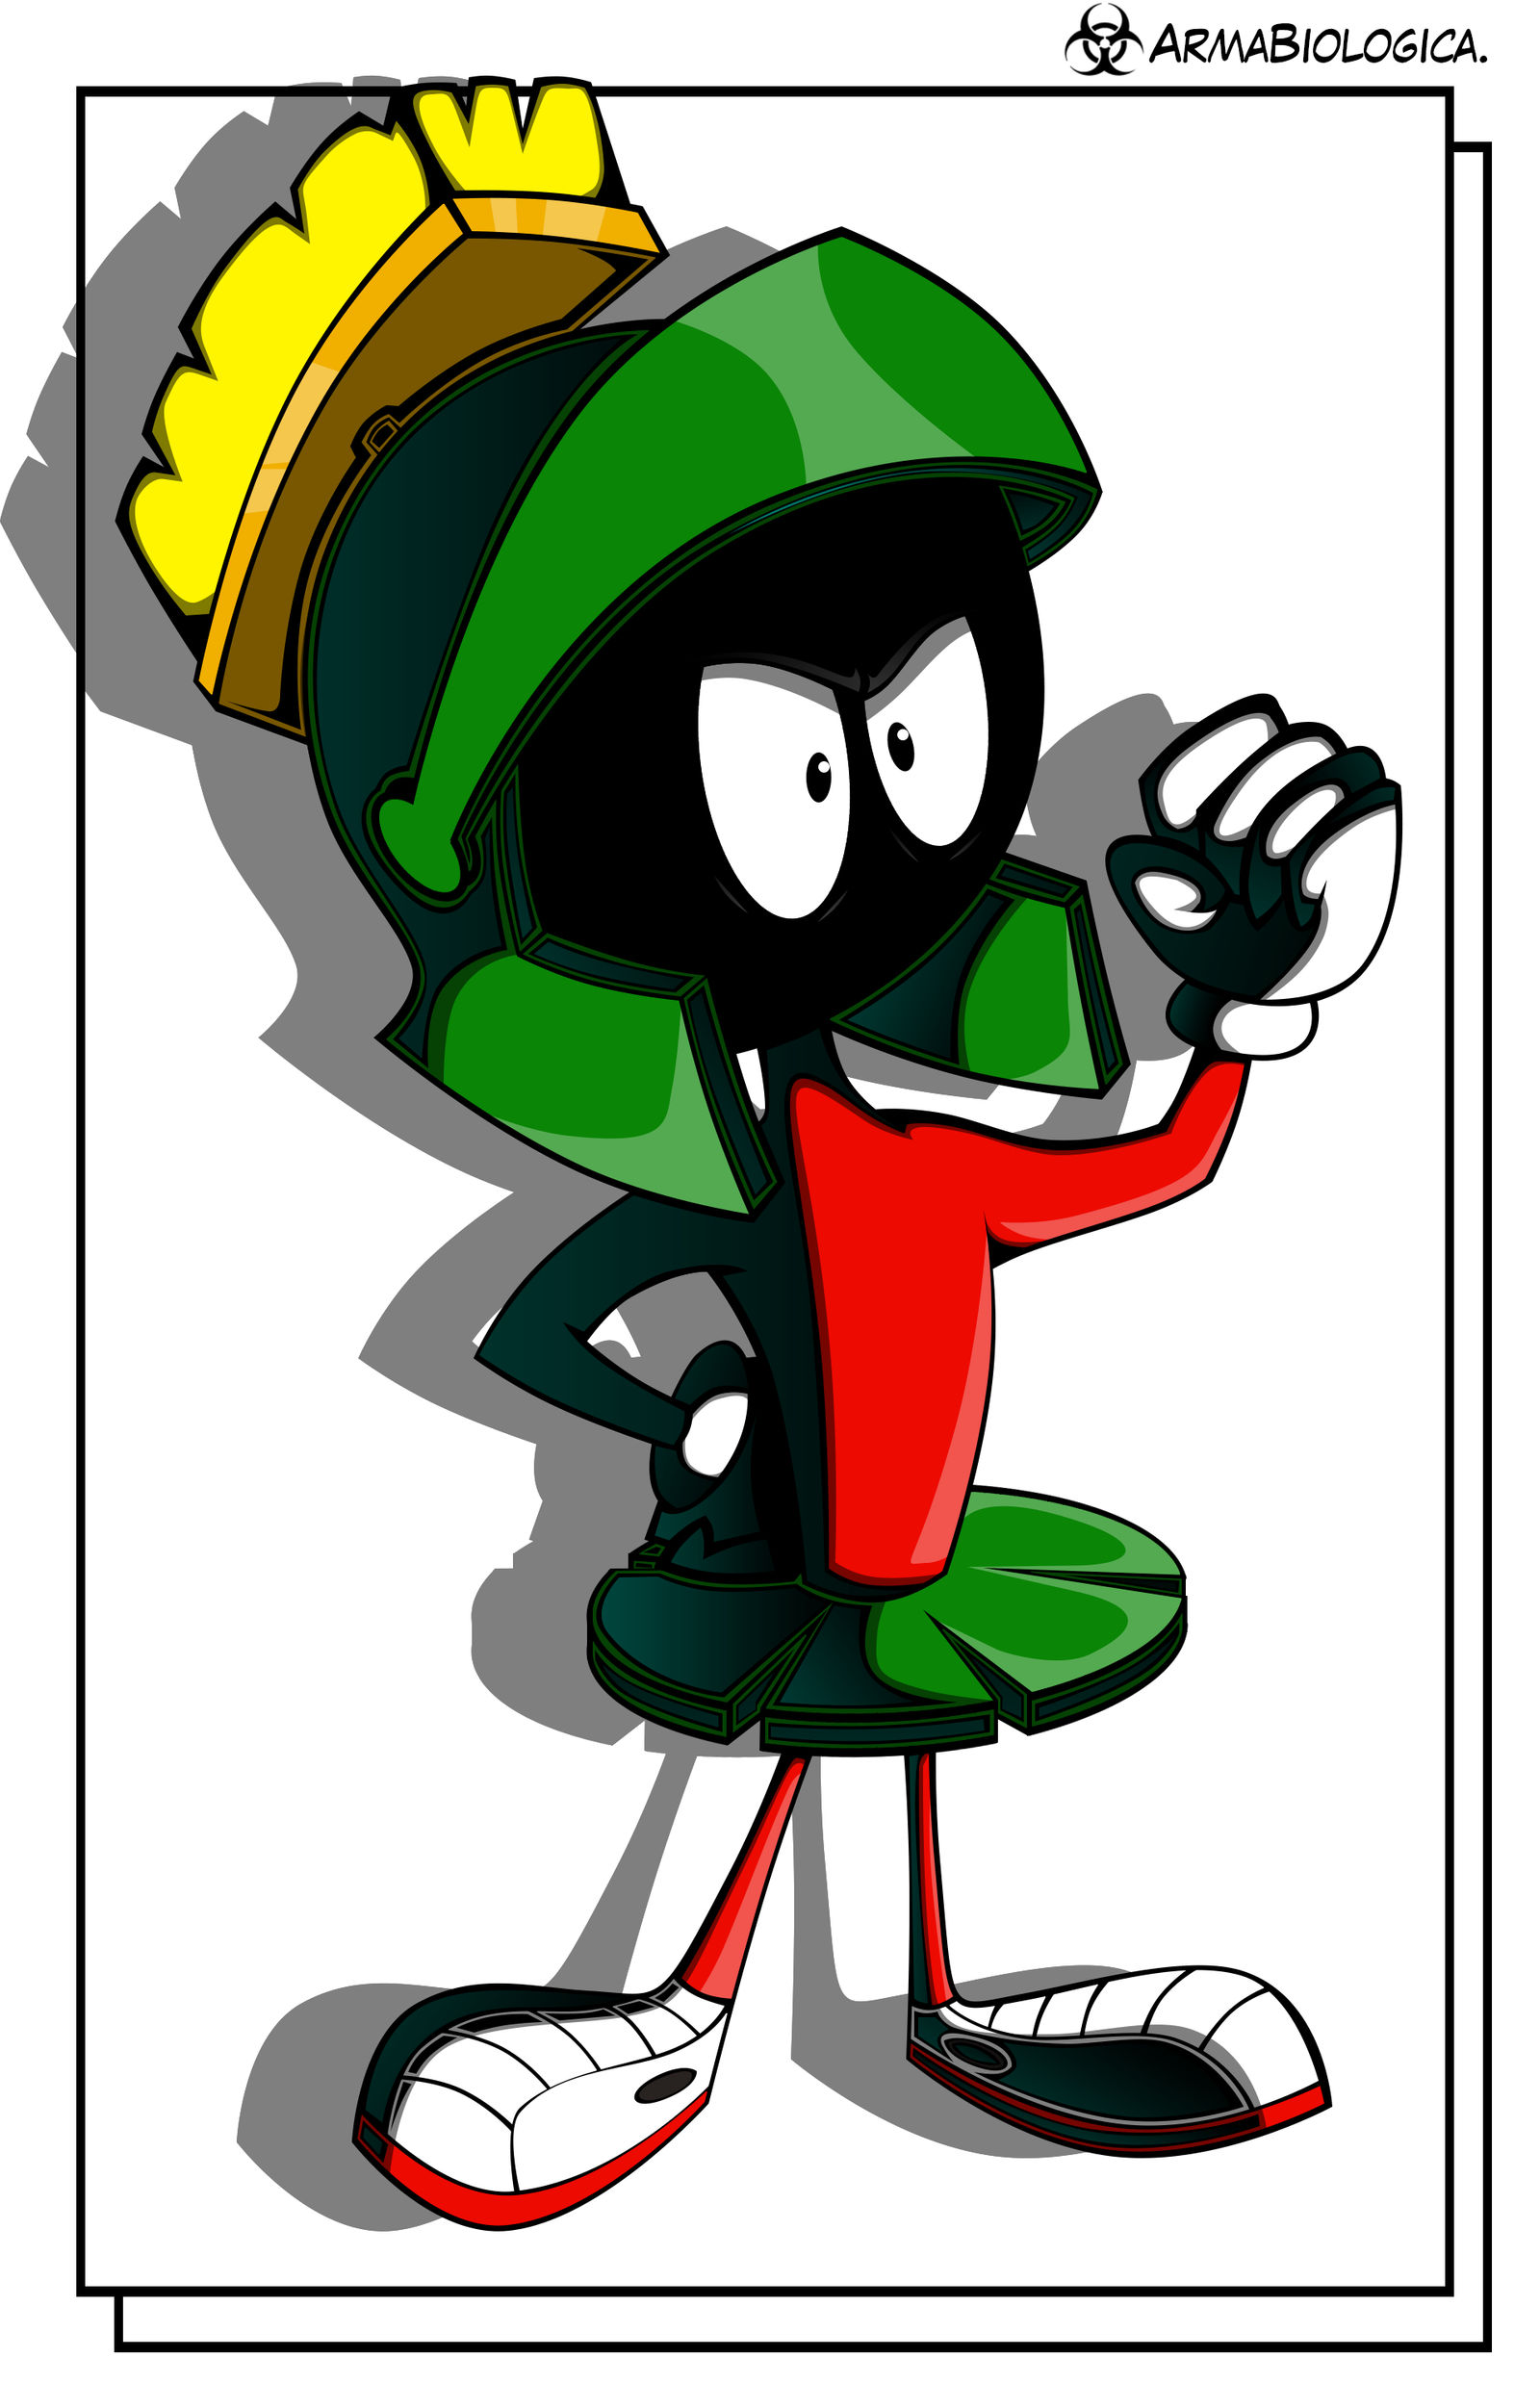 Marvin the Martian.